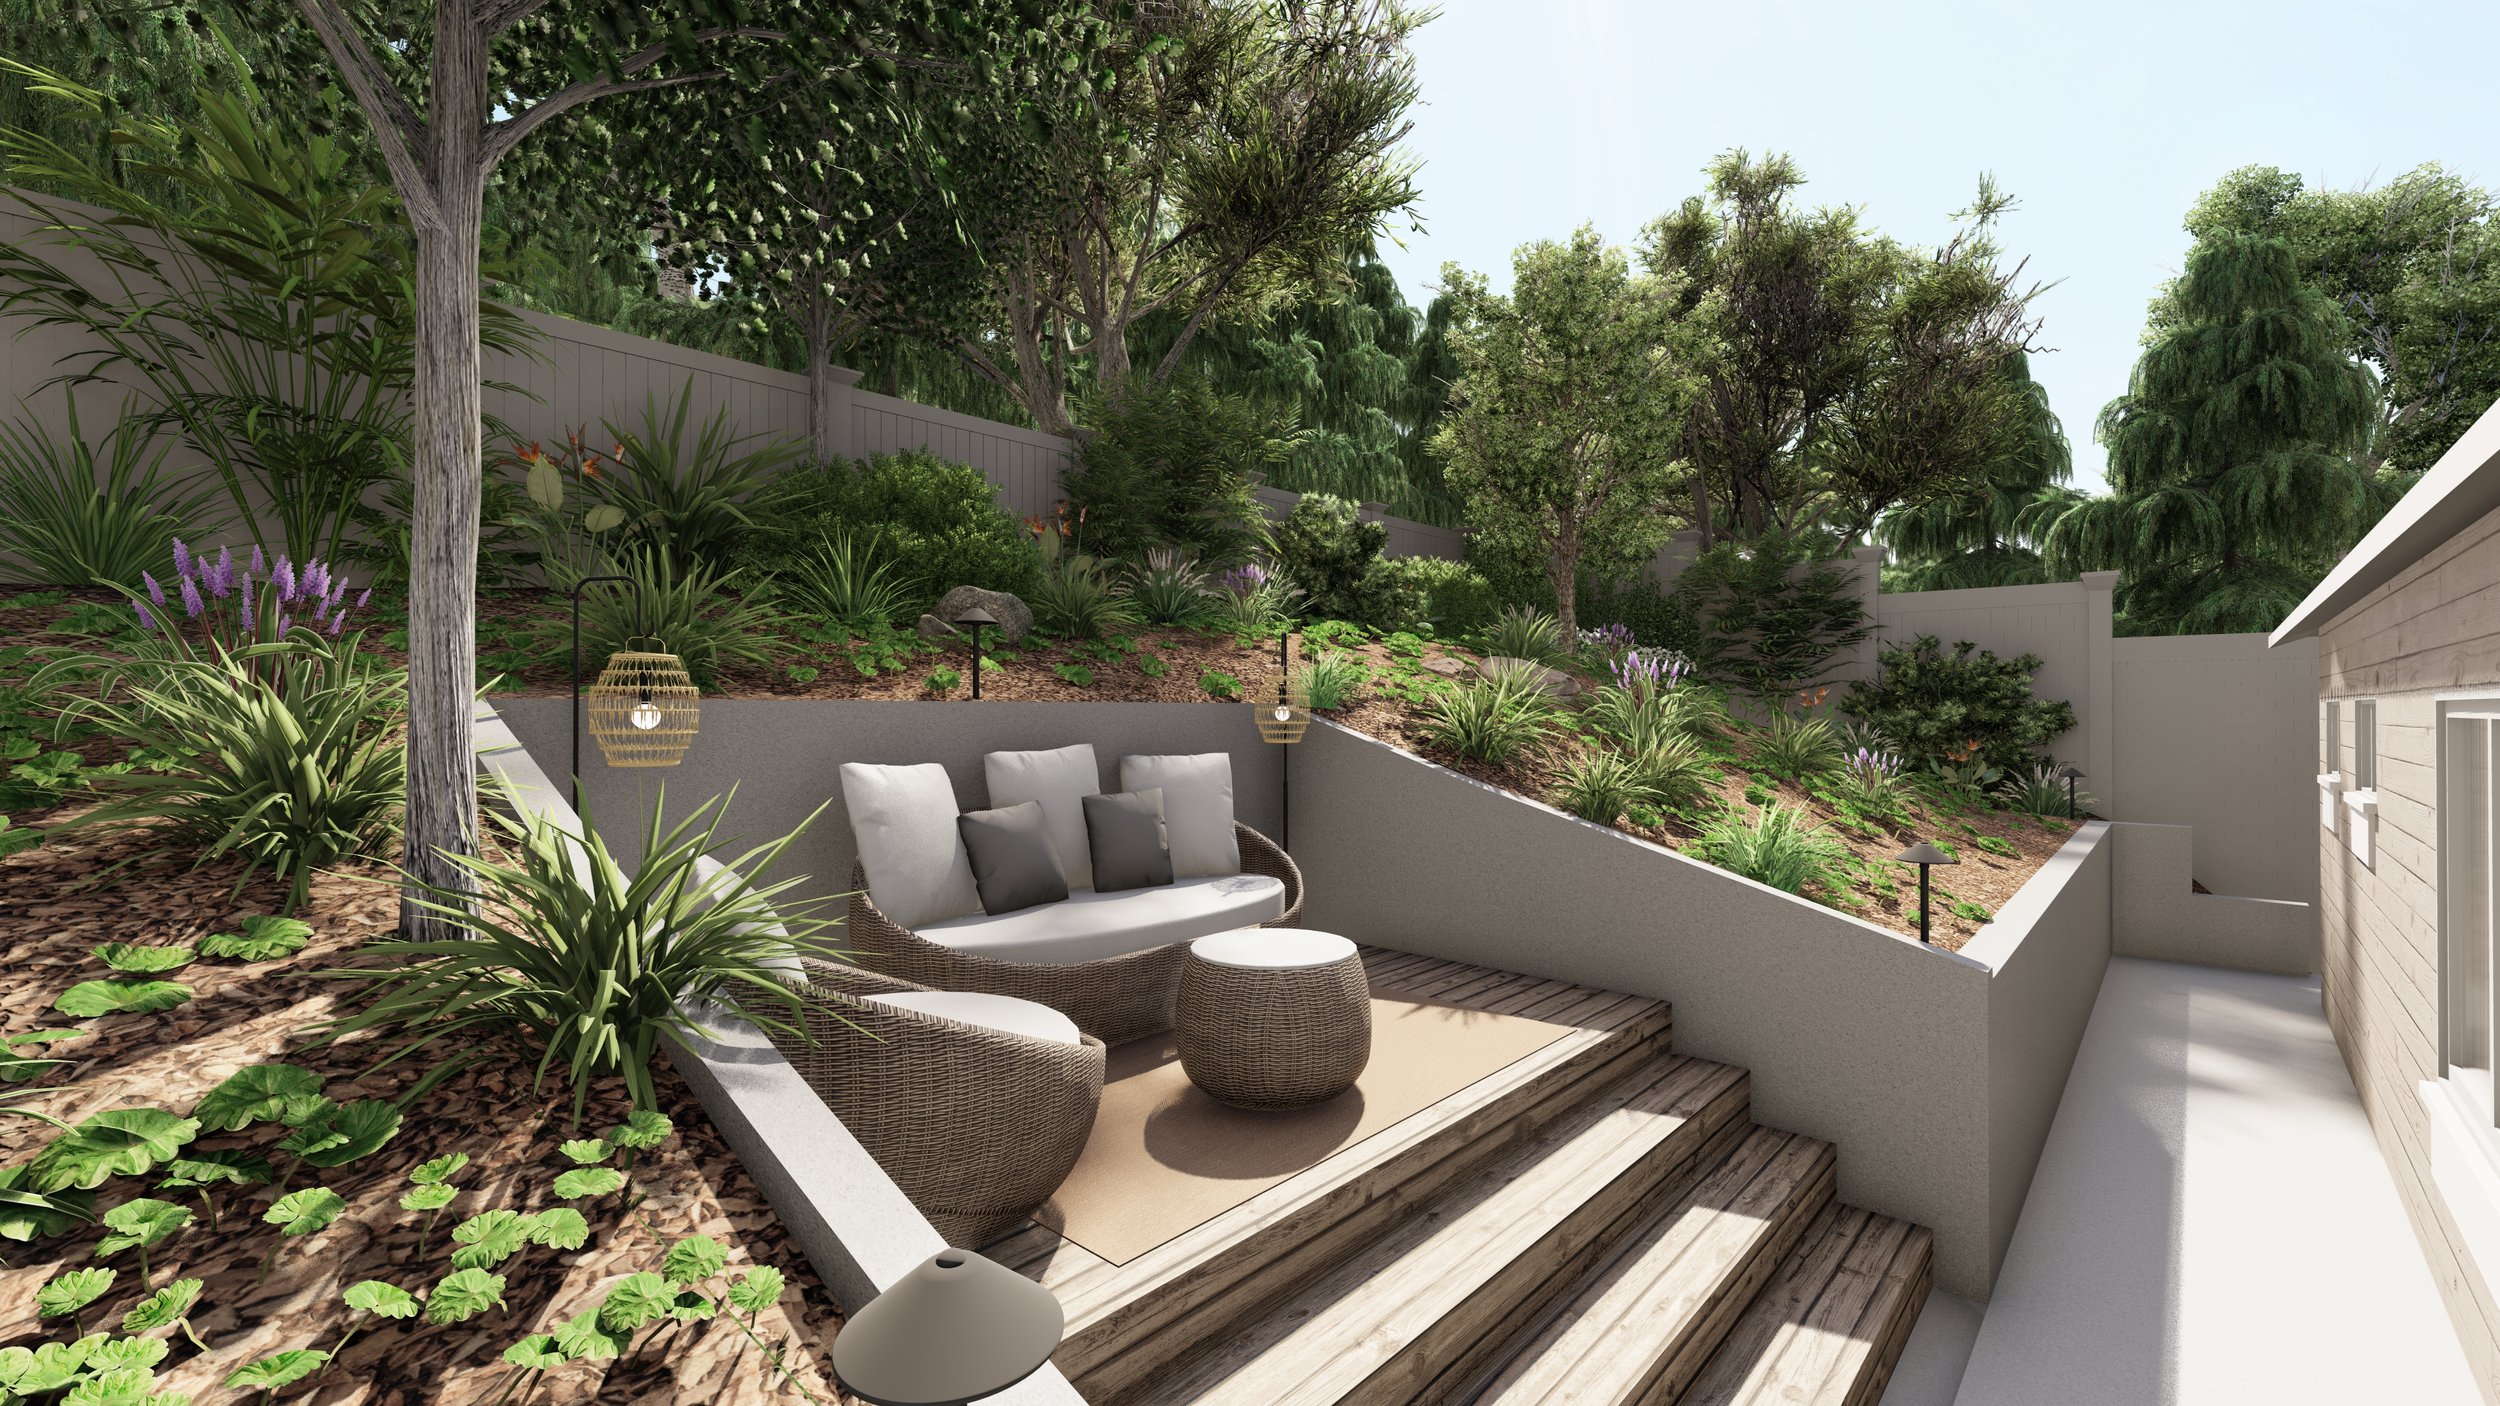 Creating new outdoor seating area in small sloped back yard in California